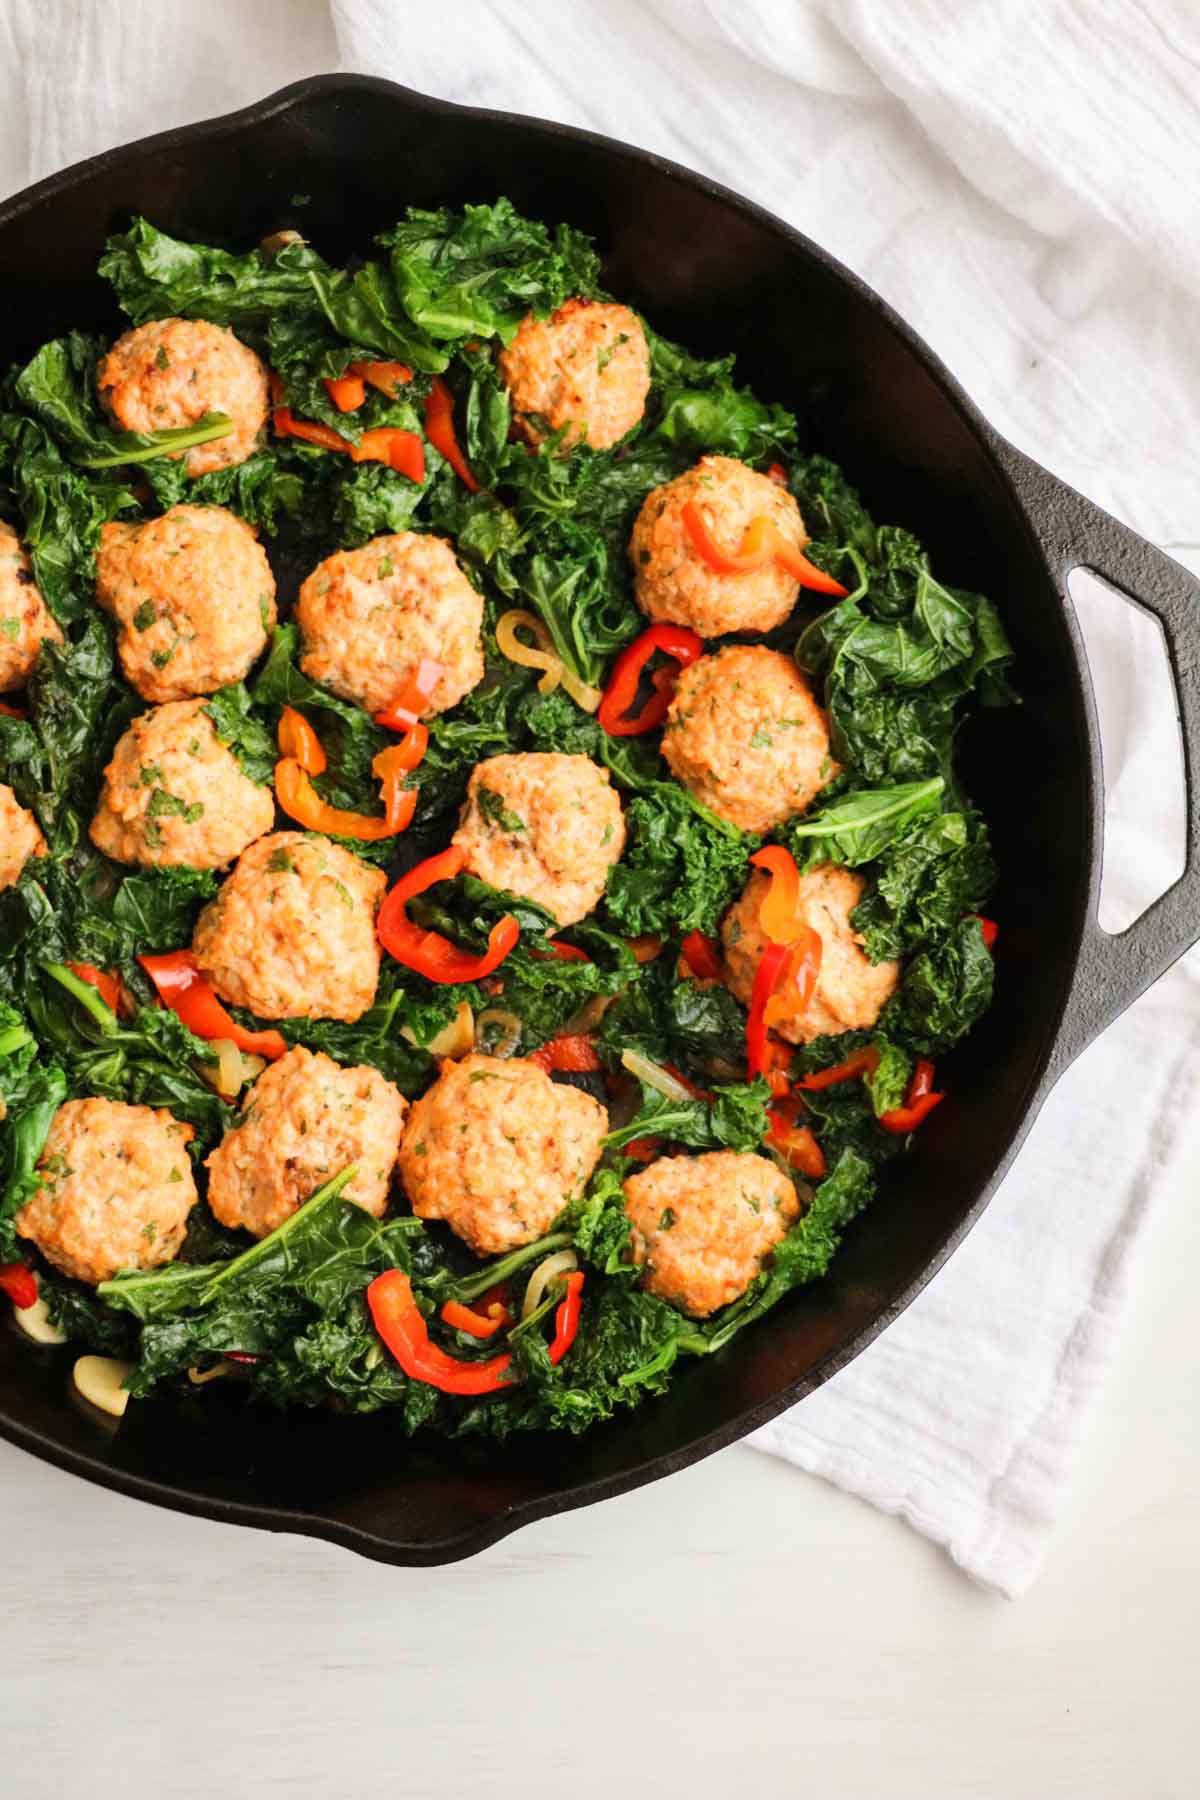 The BEST chicken meatballs in a creamy roasted red pepper feta cheese sauce with sauteed kale. One skillet and OMG, so good! |Abraskitchen.com